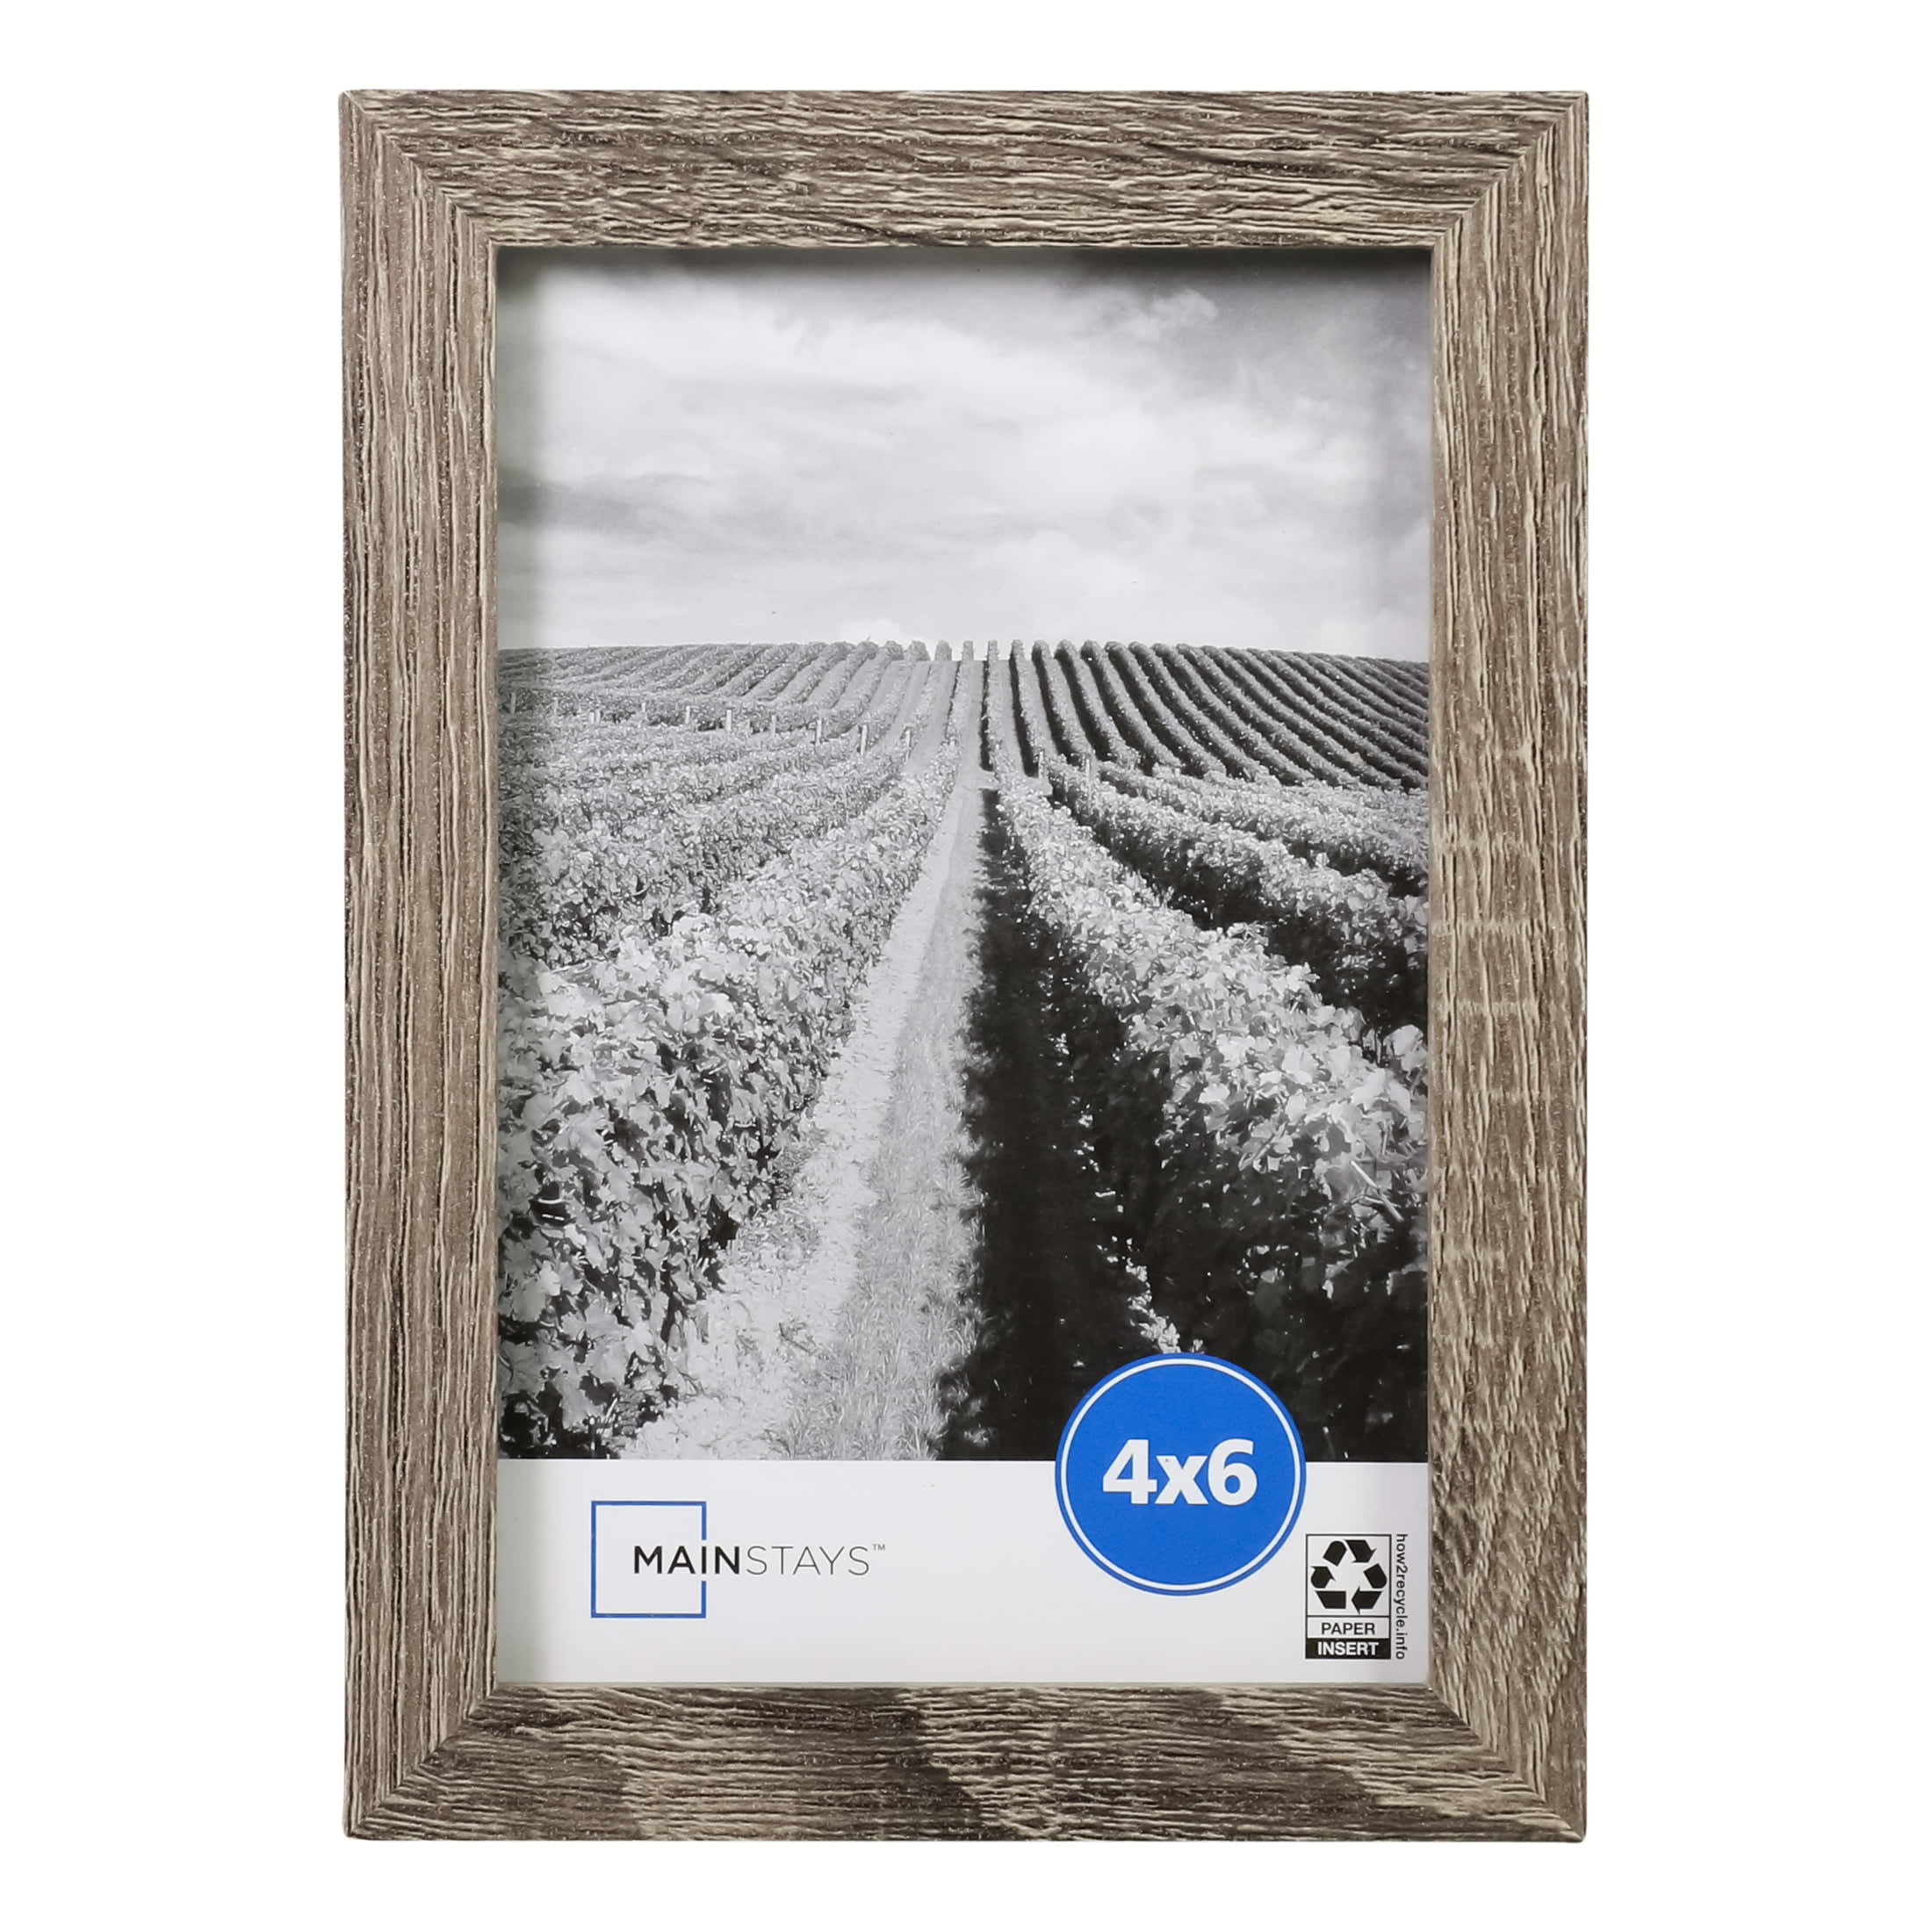 Mainstays 4x6 Rustic White Tabletop Picture Frame 